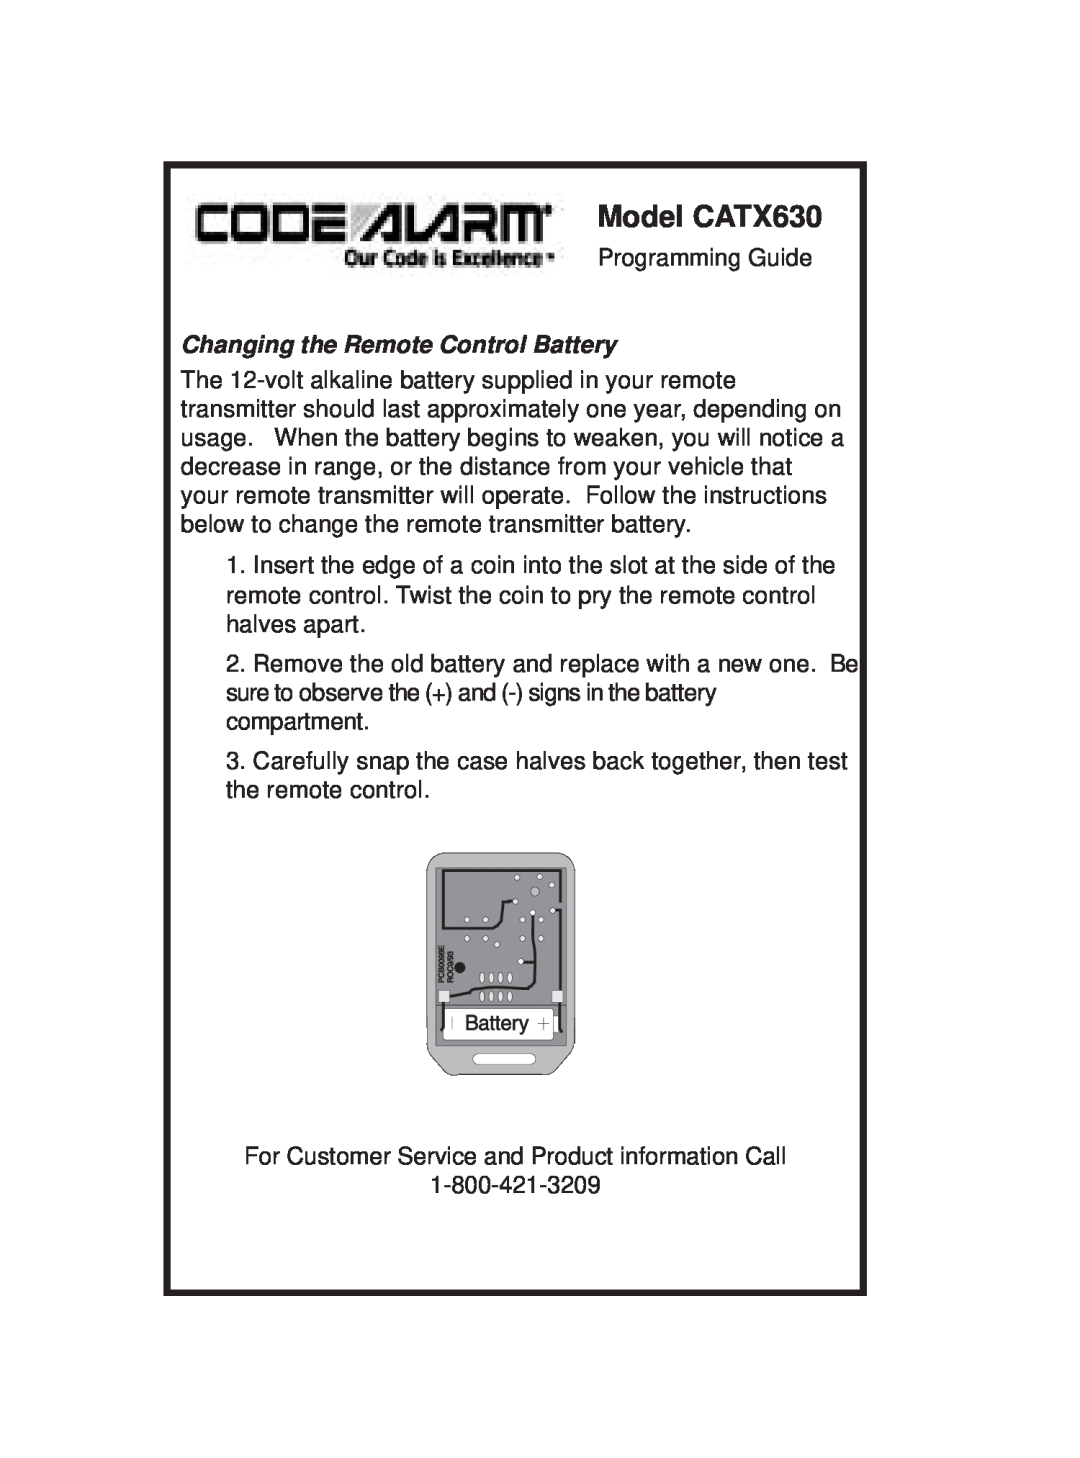 Code Alarm manual Model CATX630, Changing the Remote Control Battery 